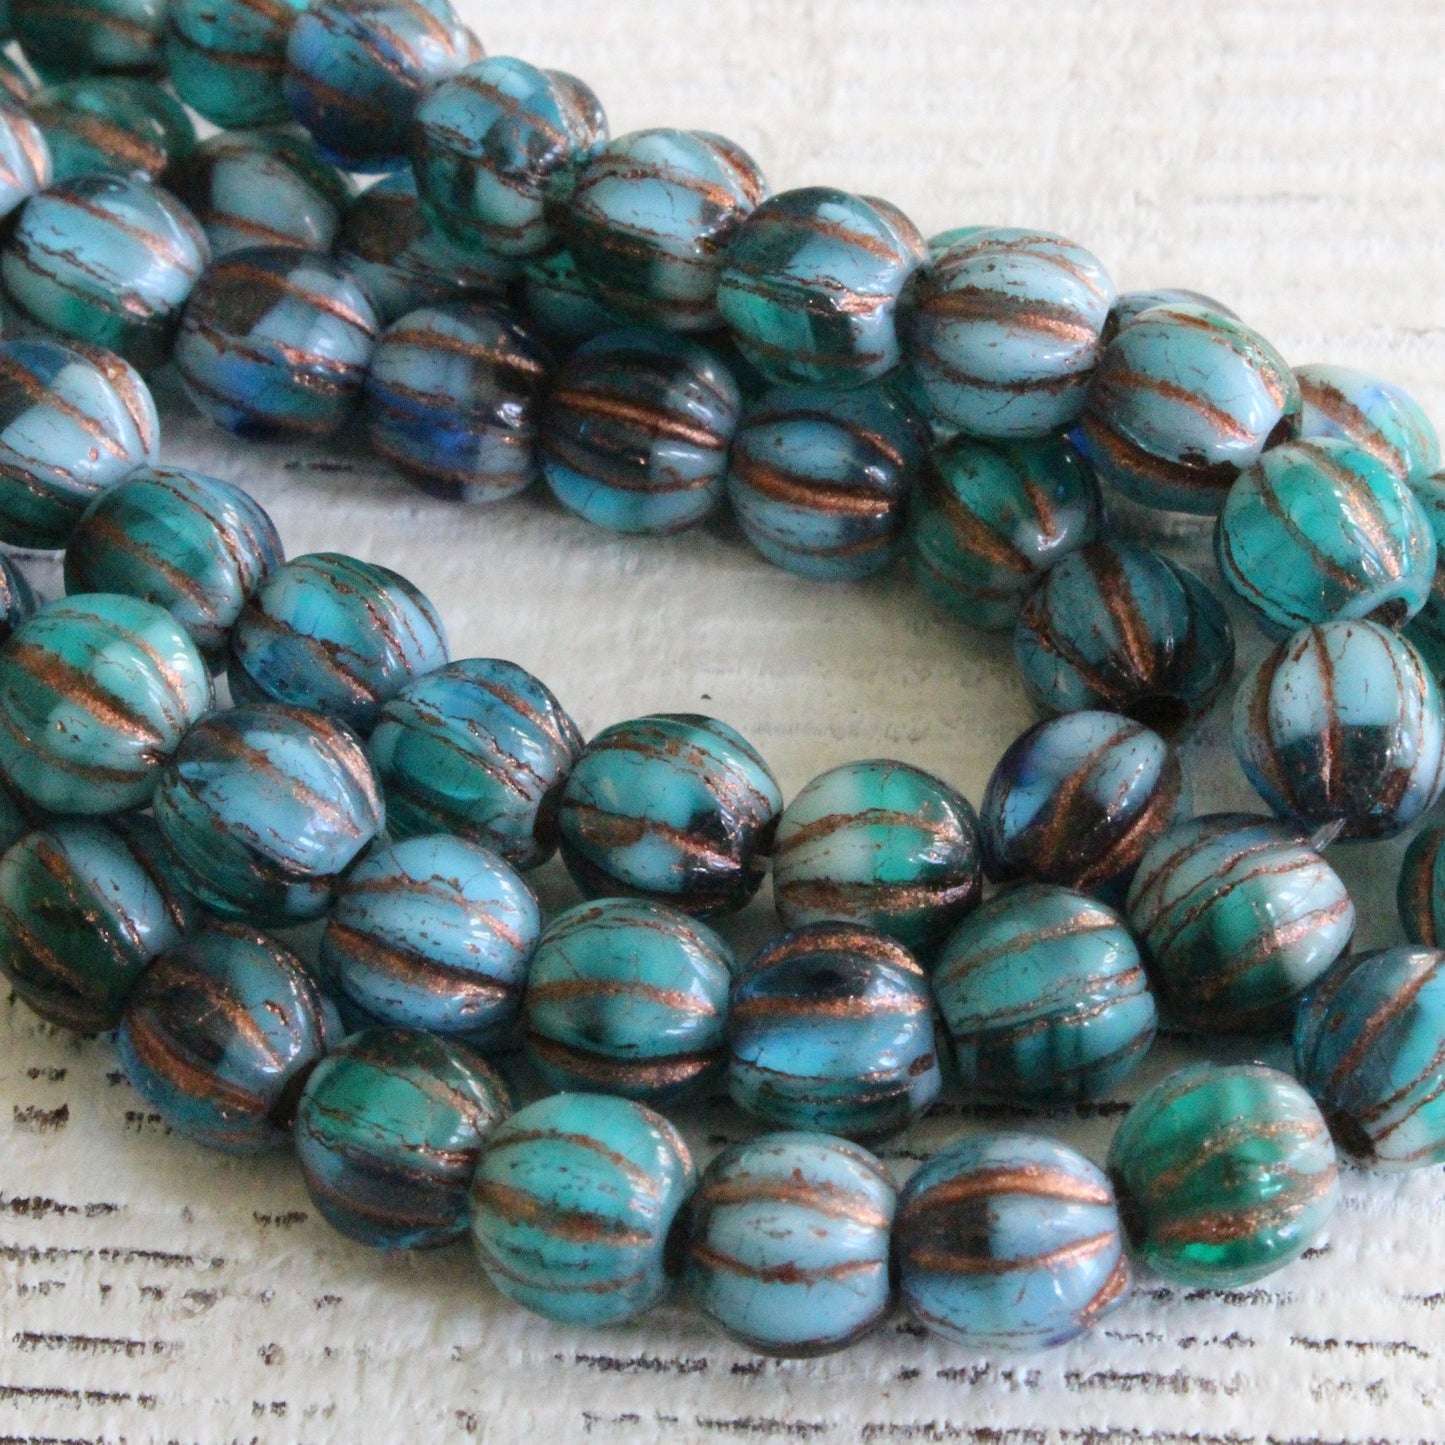 6mm Melon Beads - Green Blue Mix With Bronze Wash - 50 Beads